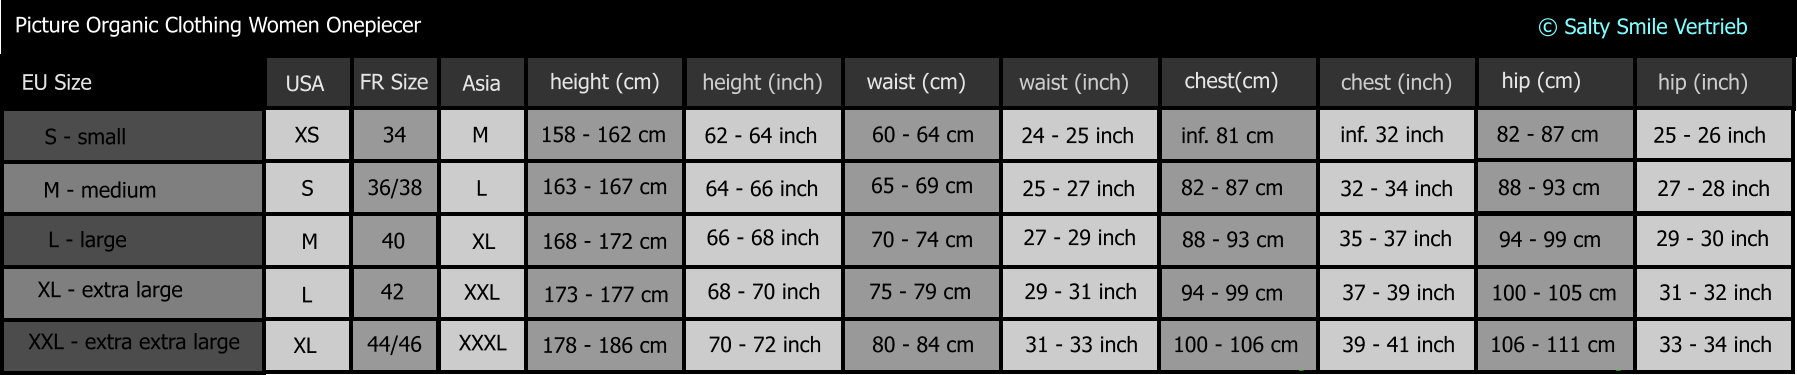 Picture organic clothing women onepiecer size chart